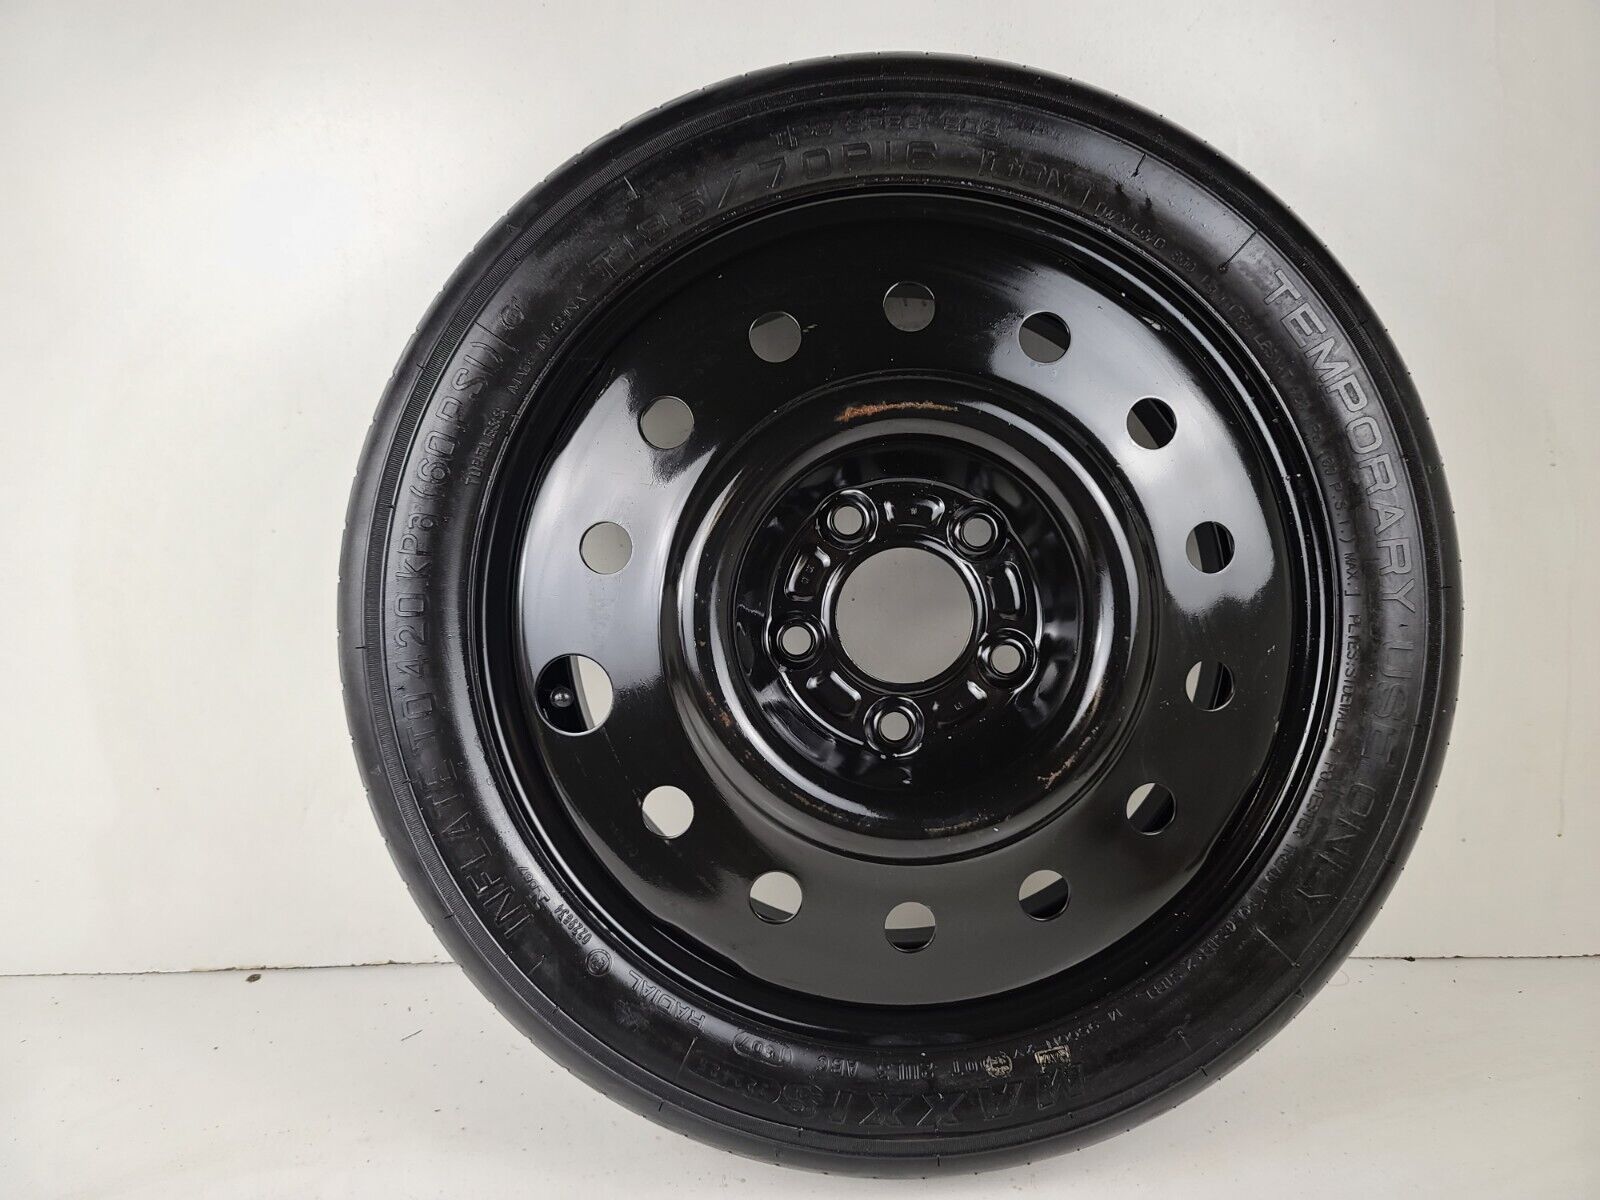 2008 - 2010 SATURN VUE SPARE TIRE WHEEL COMPACT SPARE DONUT T135/70D16 OEM